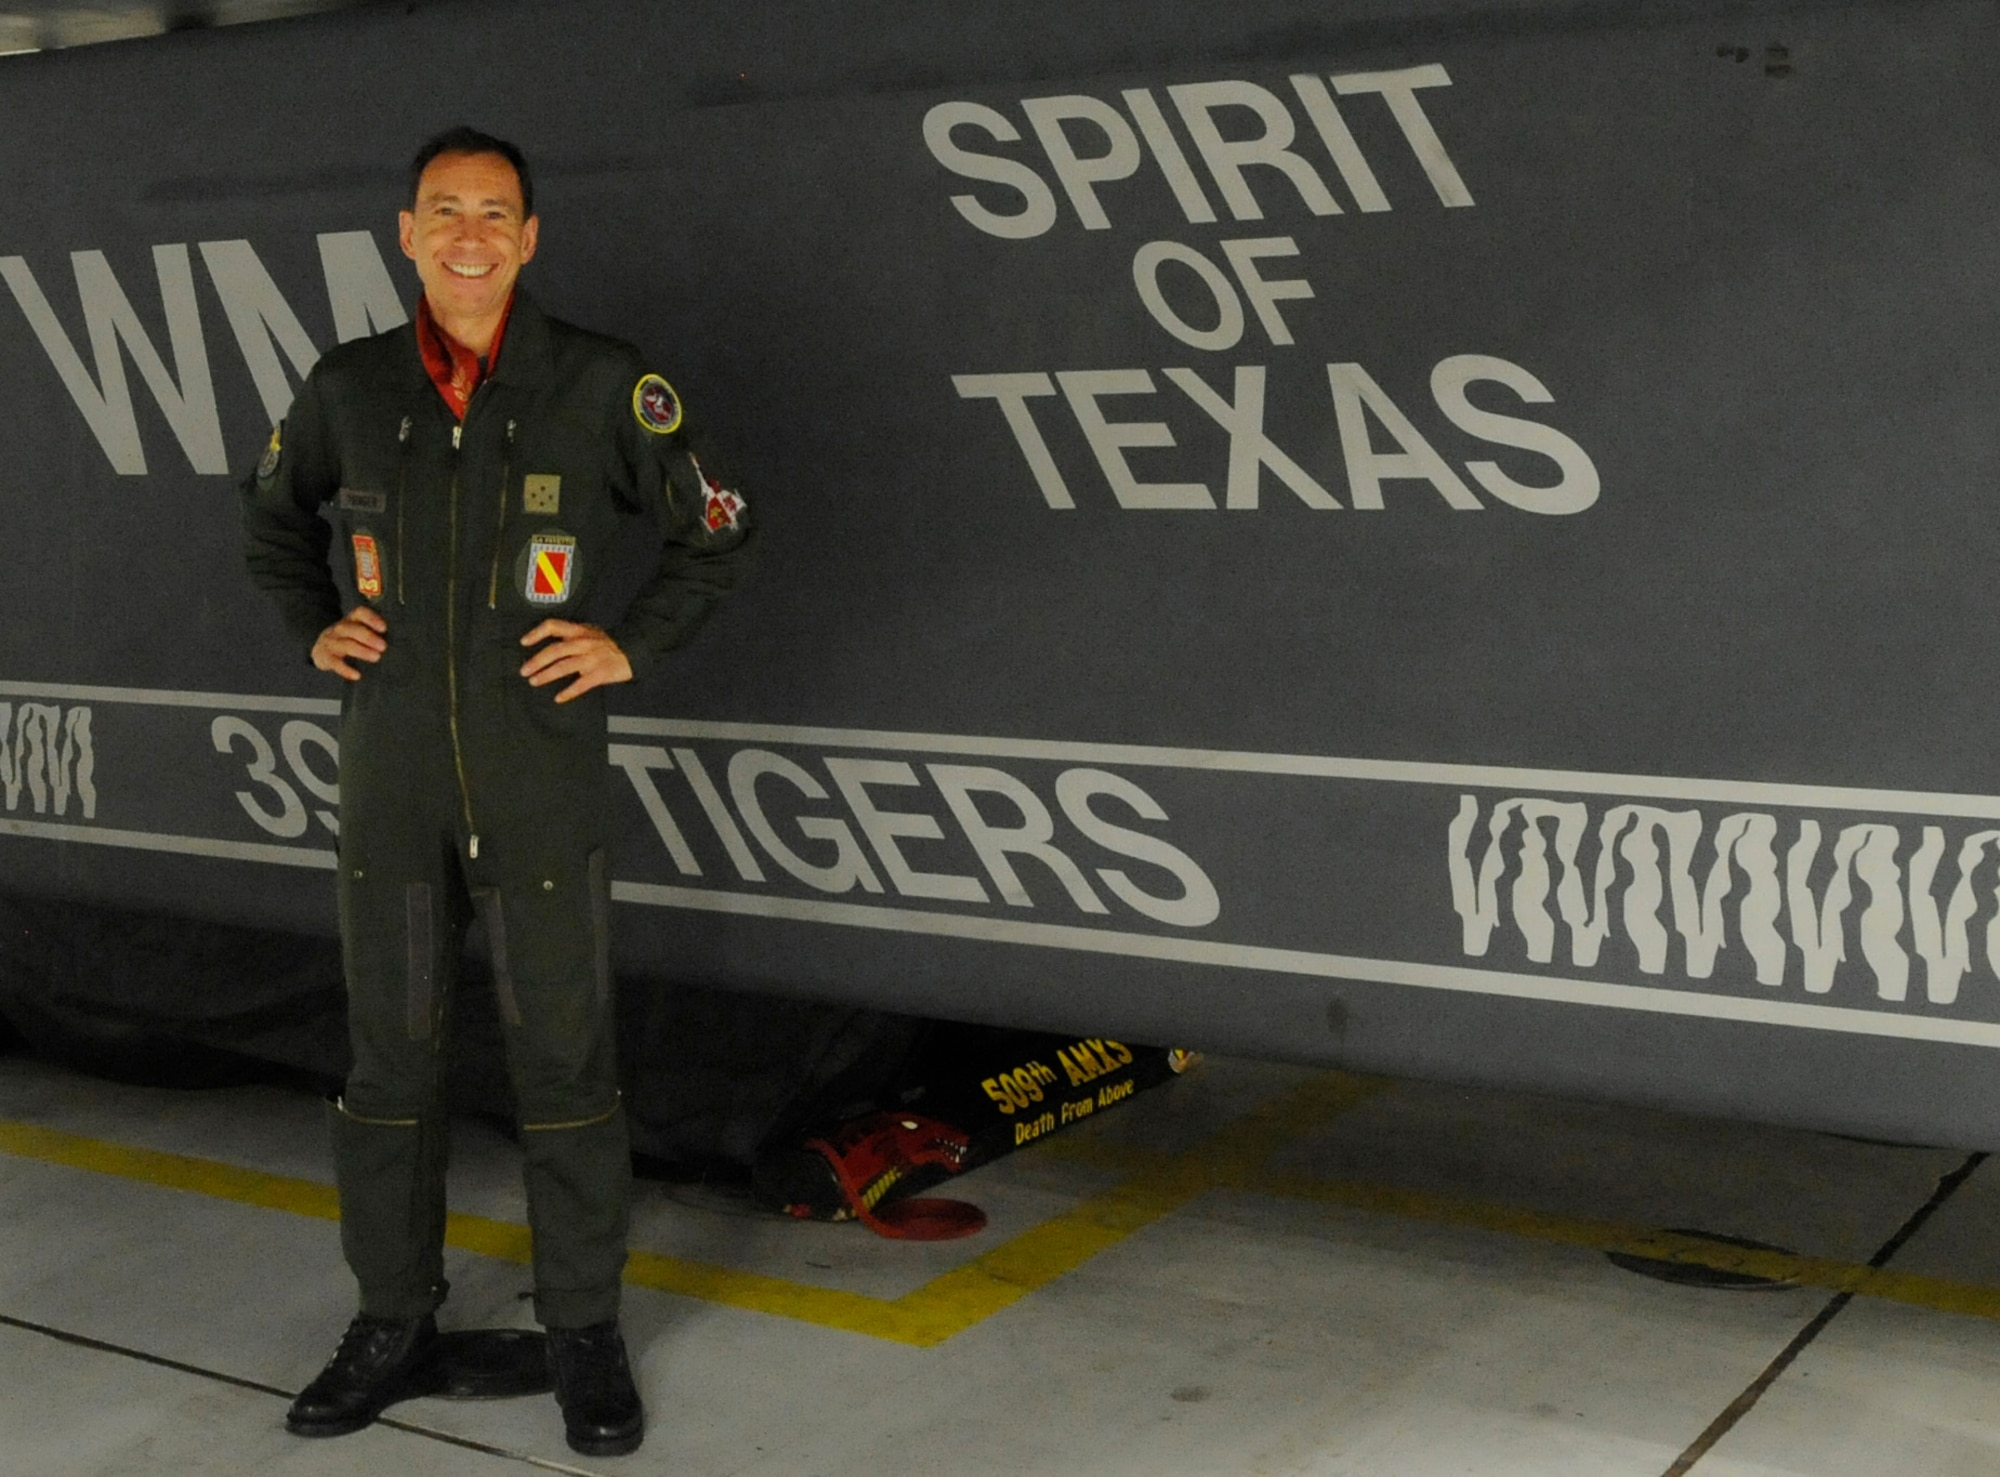 Lt. Gen. Philippe Steininger, commander of the French Air Force’s Strategic Air Forces Command, stands next the Spirit of Texas B-2A Spirit bomber during his tour of Whiteman Air Force Base, Mo., May 26, 2015. Steininger’s visit is the most recent event in a regular series of exchanges between his command and Air Force Global Strike Command to develop mutual understanding between the United States and France’s strategic air forces. (U.S. Air Force photo by Staff Sgt. Alexandra M. Longfellow/Released)